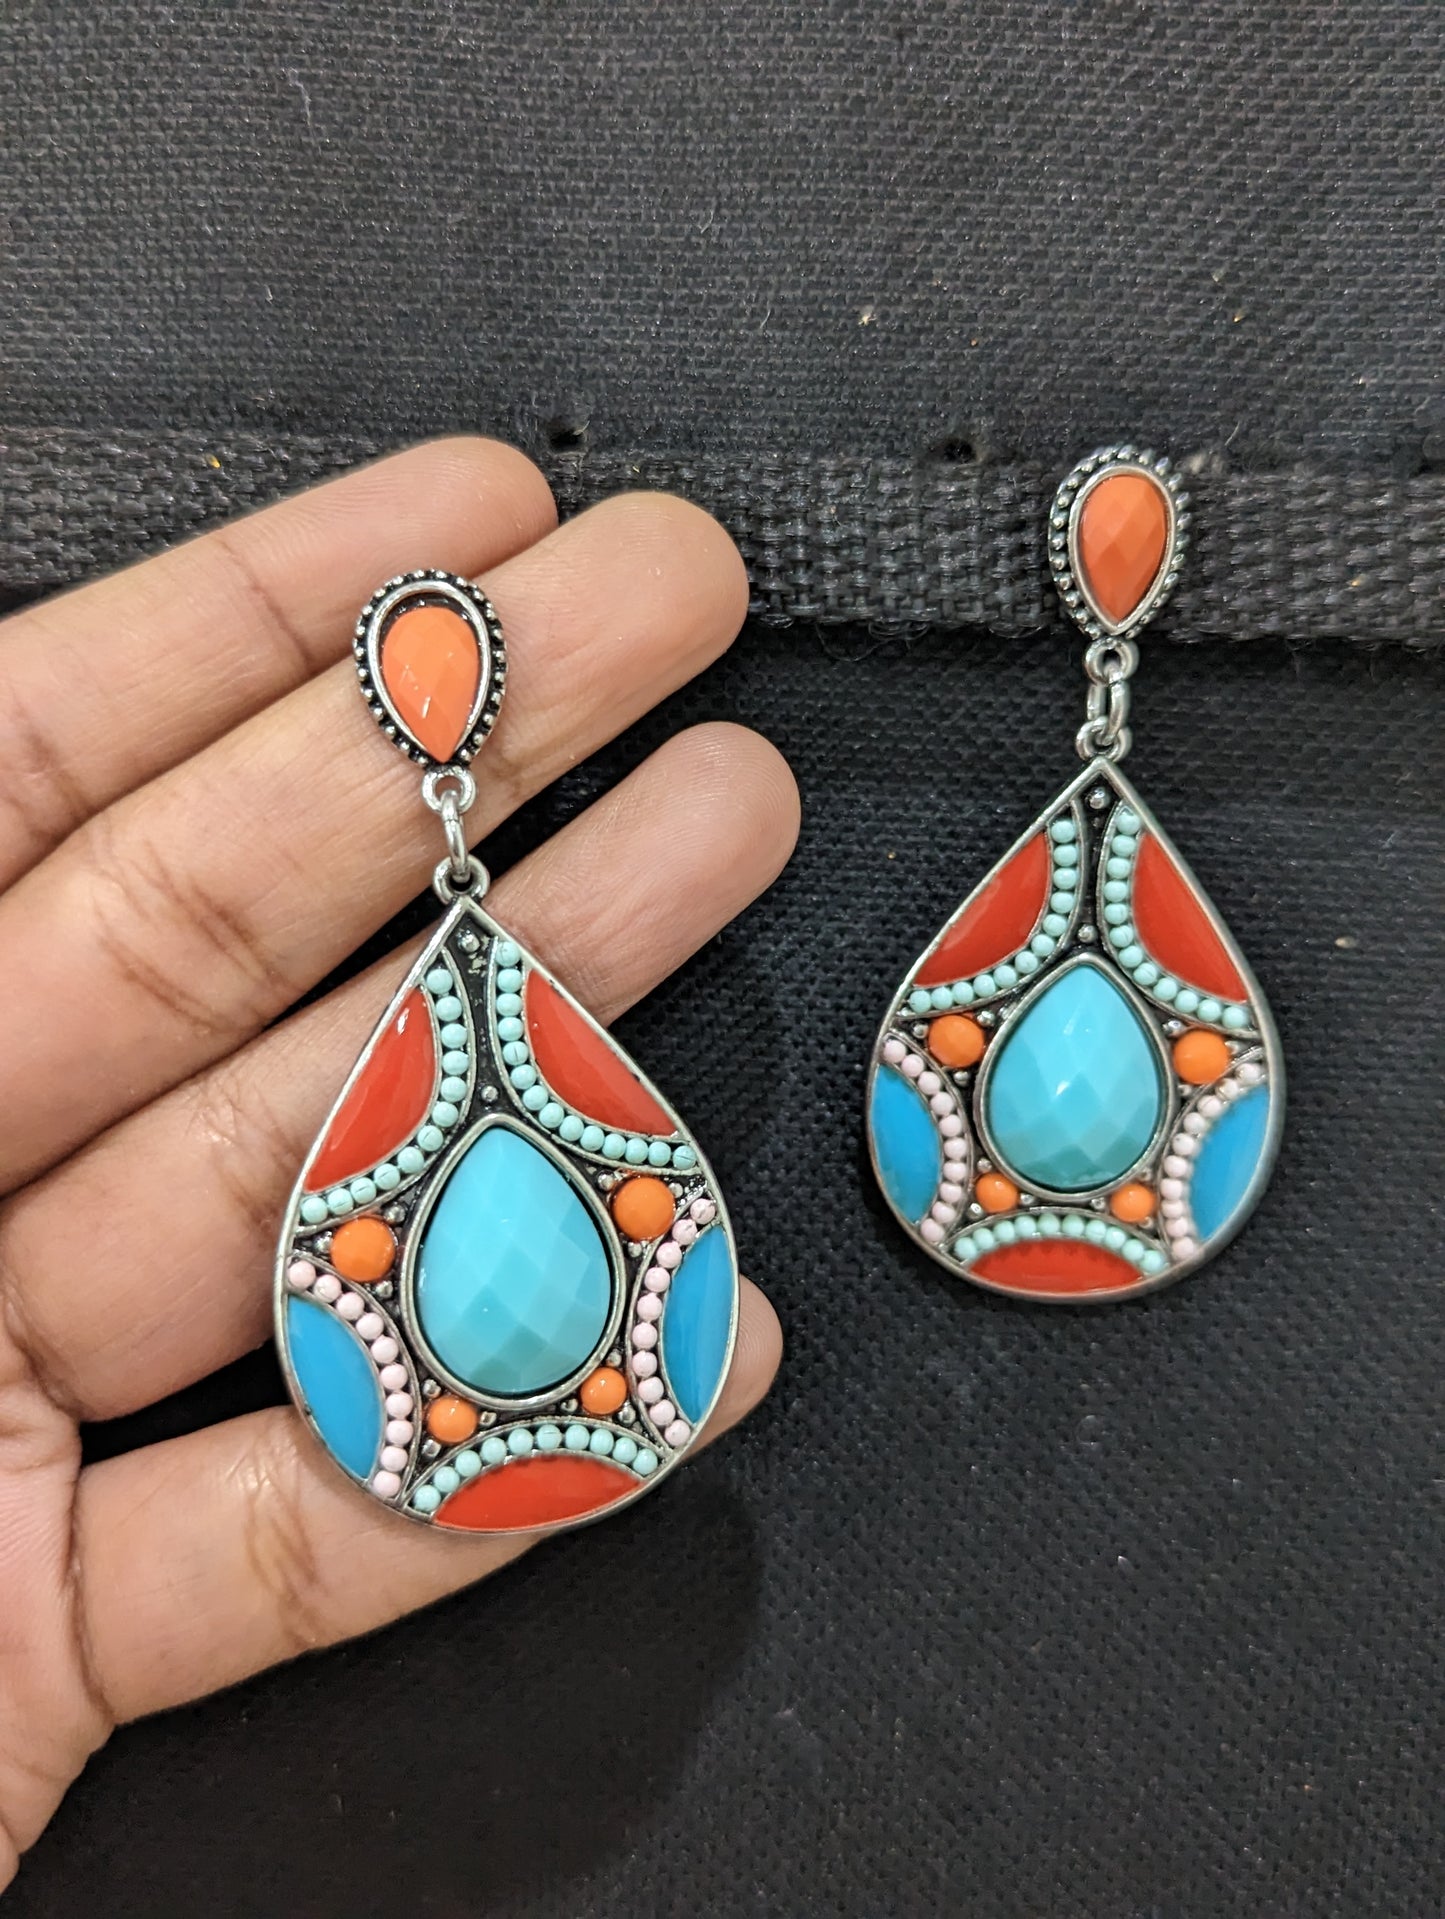 Colorful antique silver earrings